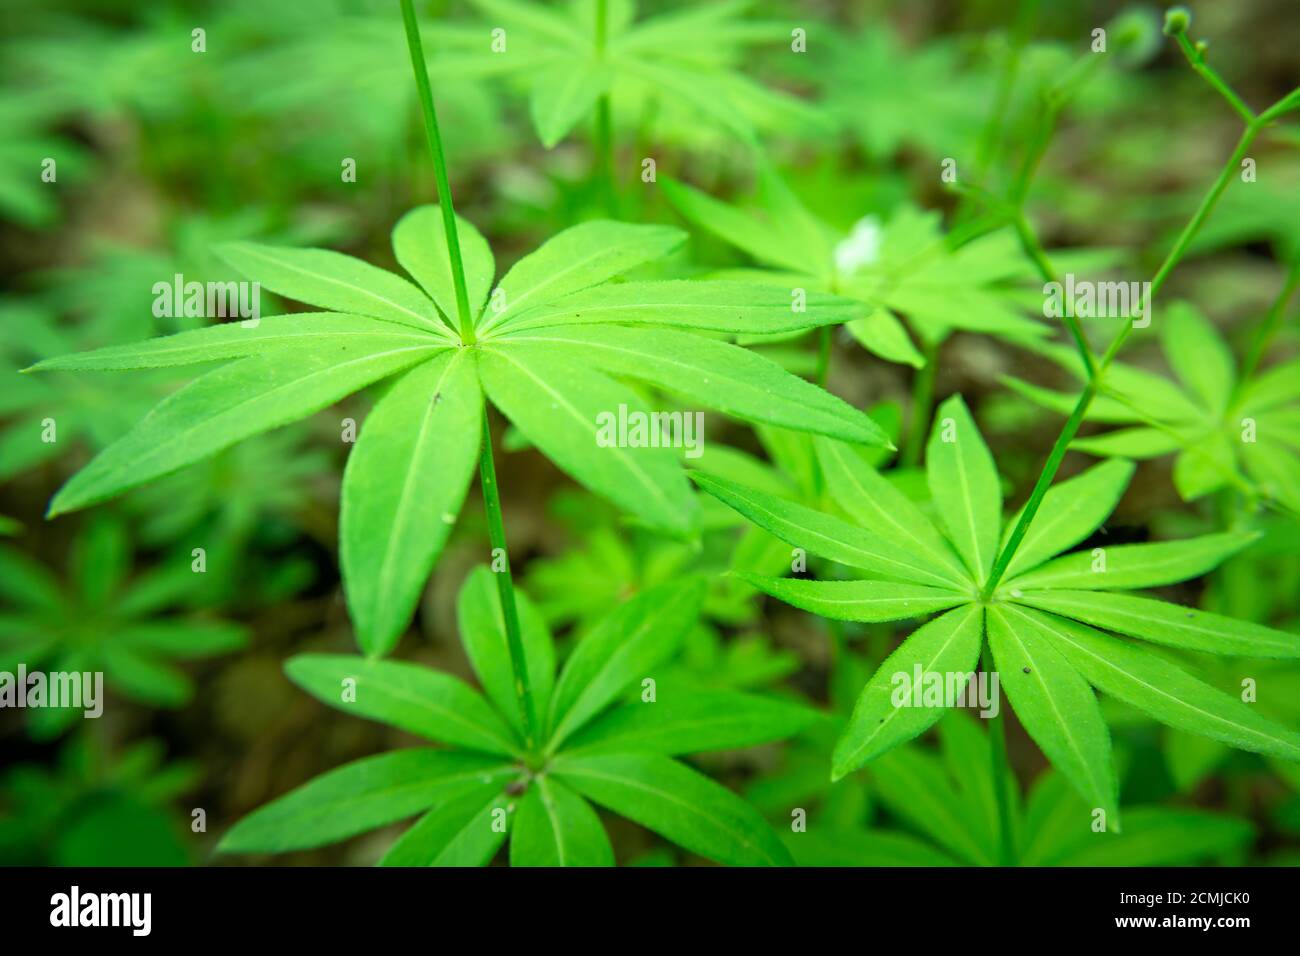 Green forest plant with small leaves, close up Stock Photo